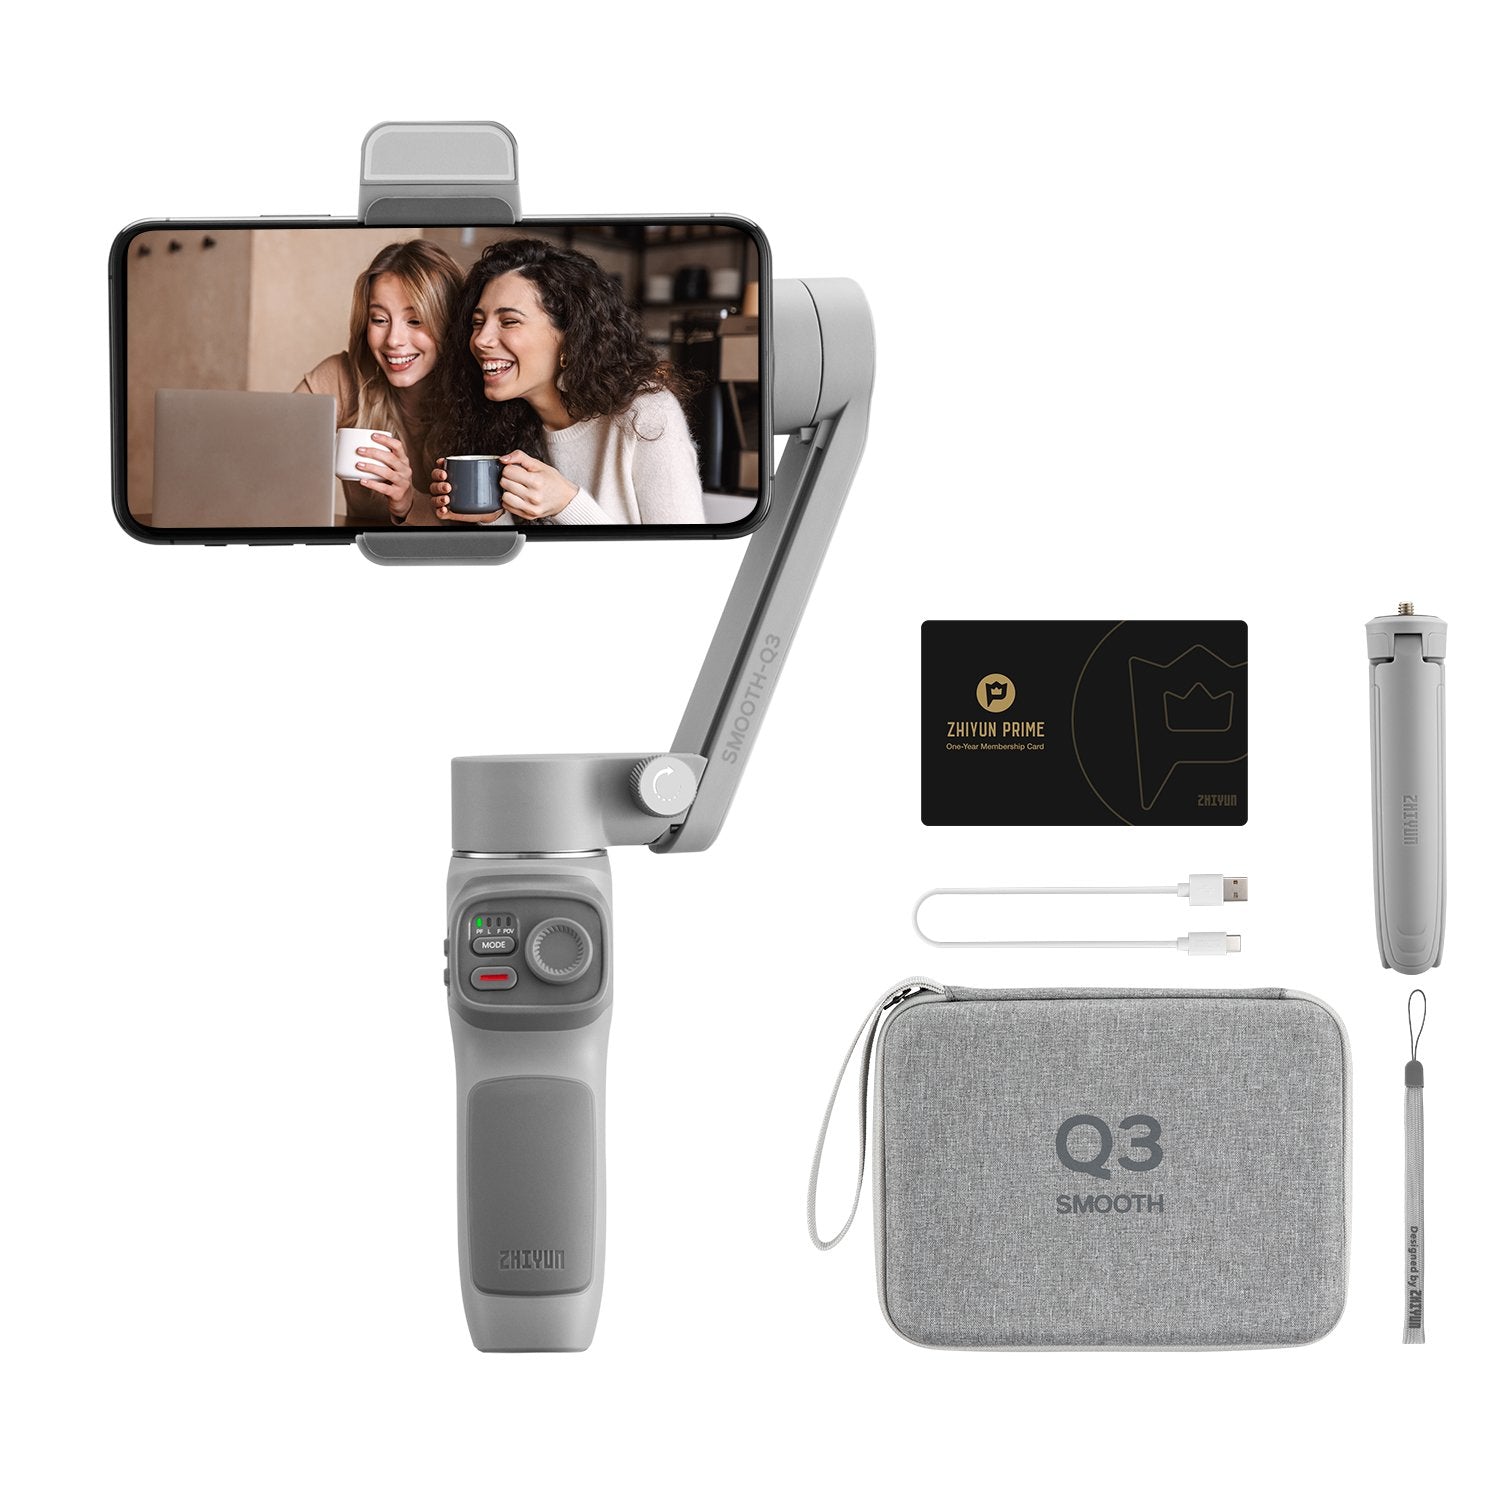 Smooth Q3 – ZHIYUN OFFICIAL STORE